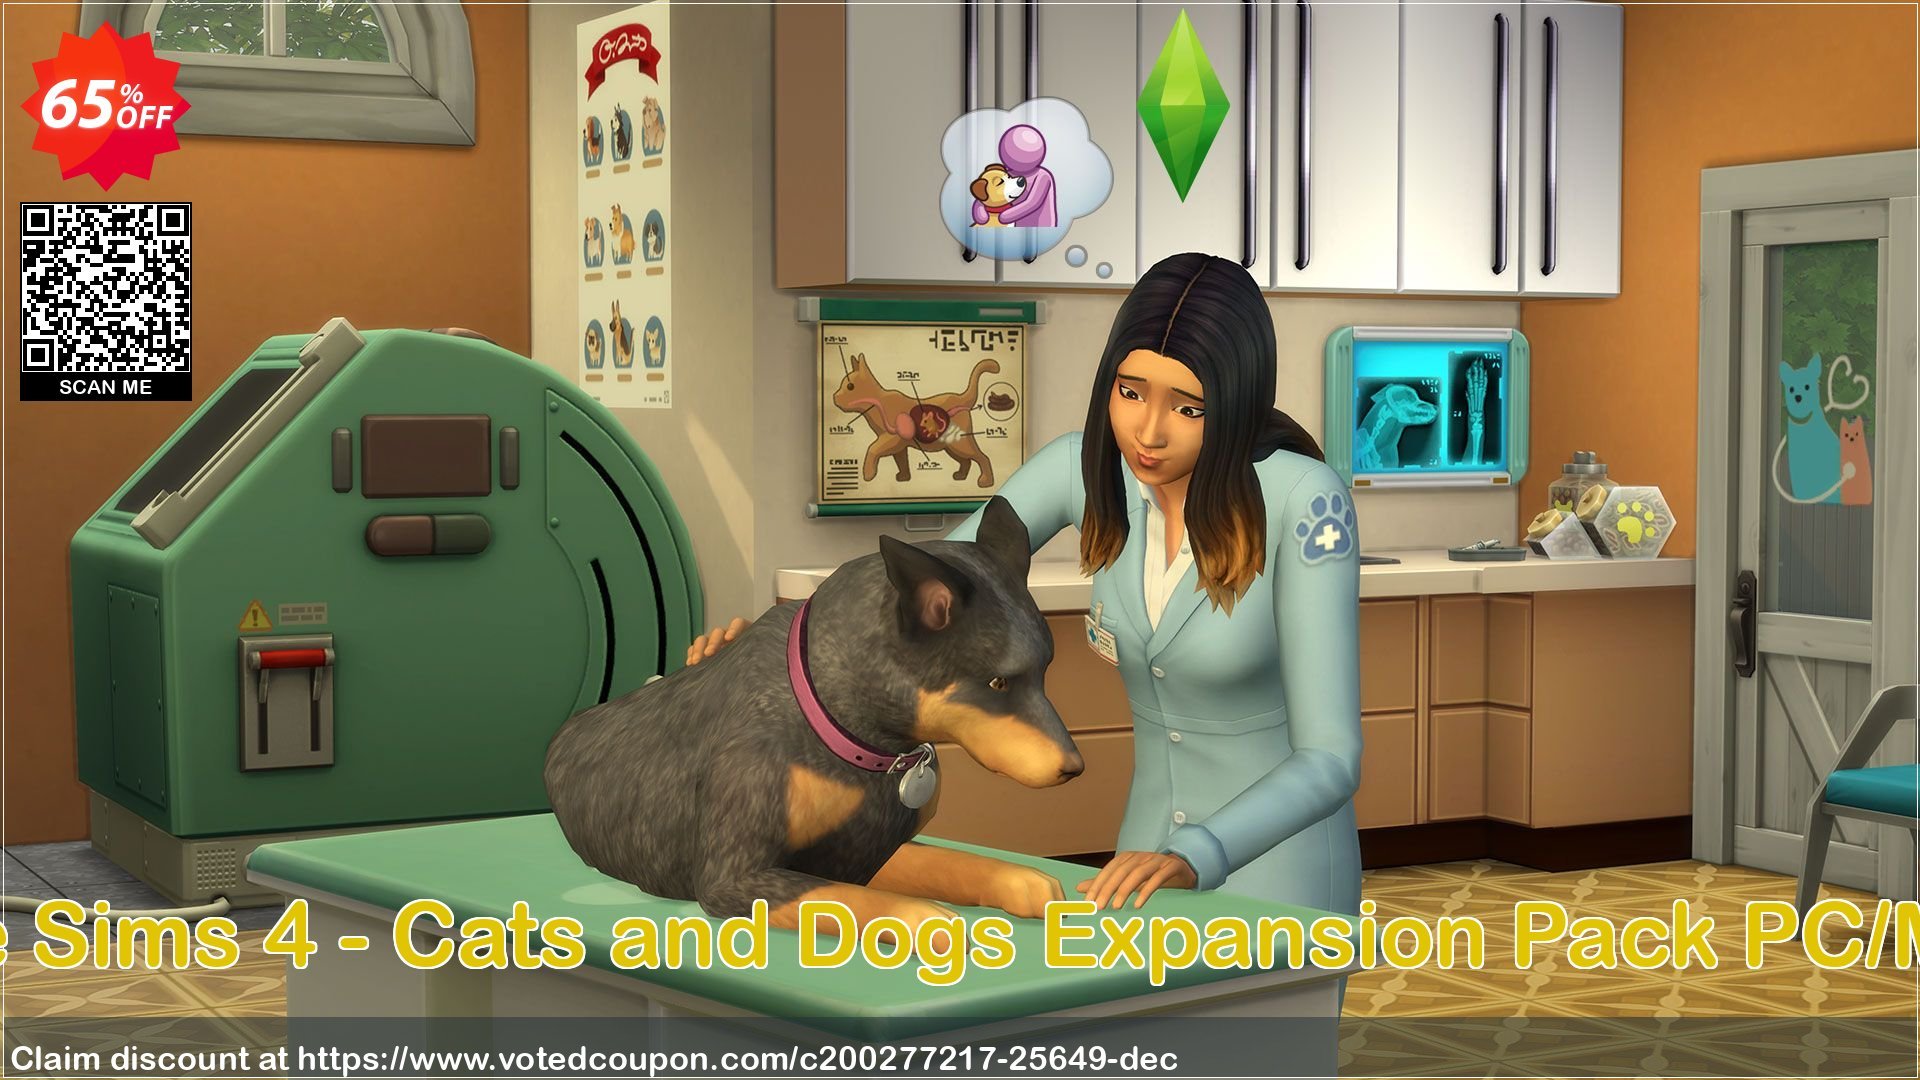 The Sims 4 - Cats and Dogs Expansion Pack PC/MAC Coupon, discount The Sims 4 - Cats and Dogs Expansion Pack PC/Mac Deal. Promotion: The Sims 4 - Cats and Dogs Expansion Pack PC/Mac Exclusive offer 